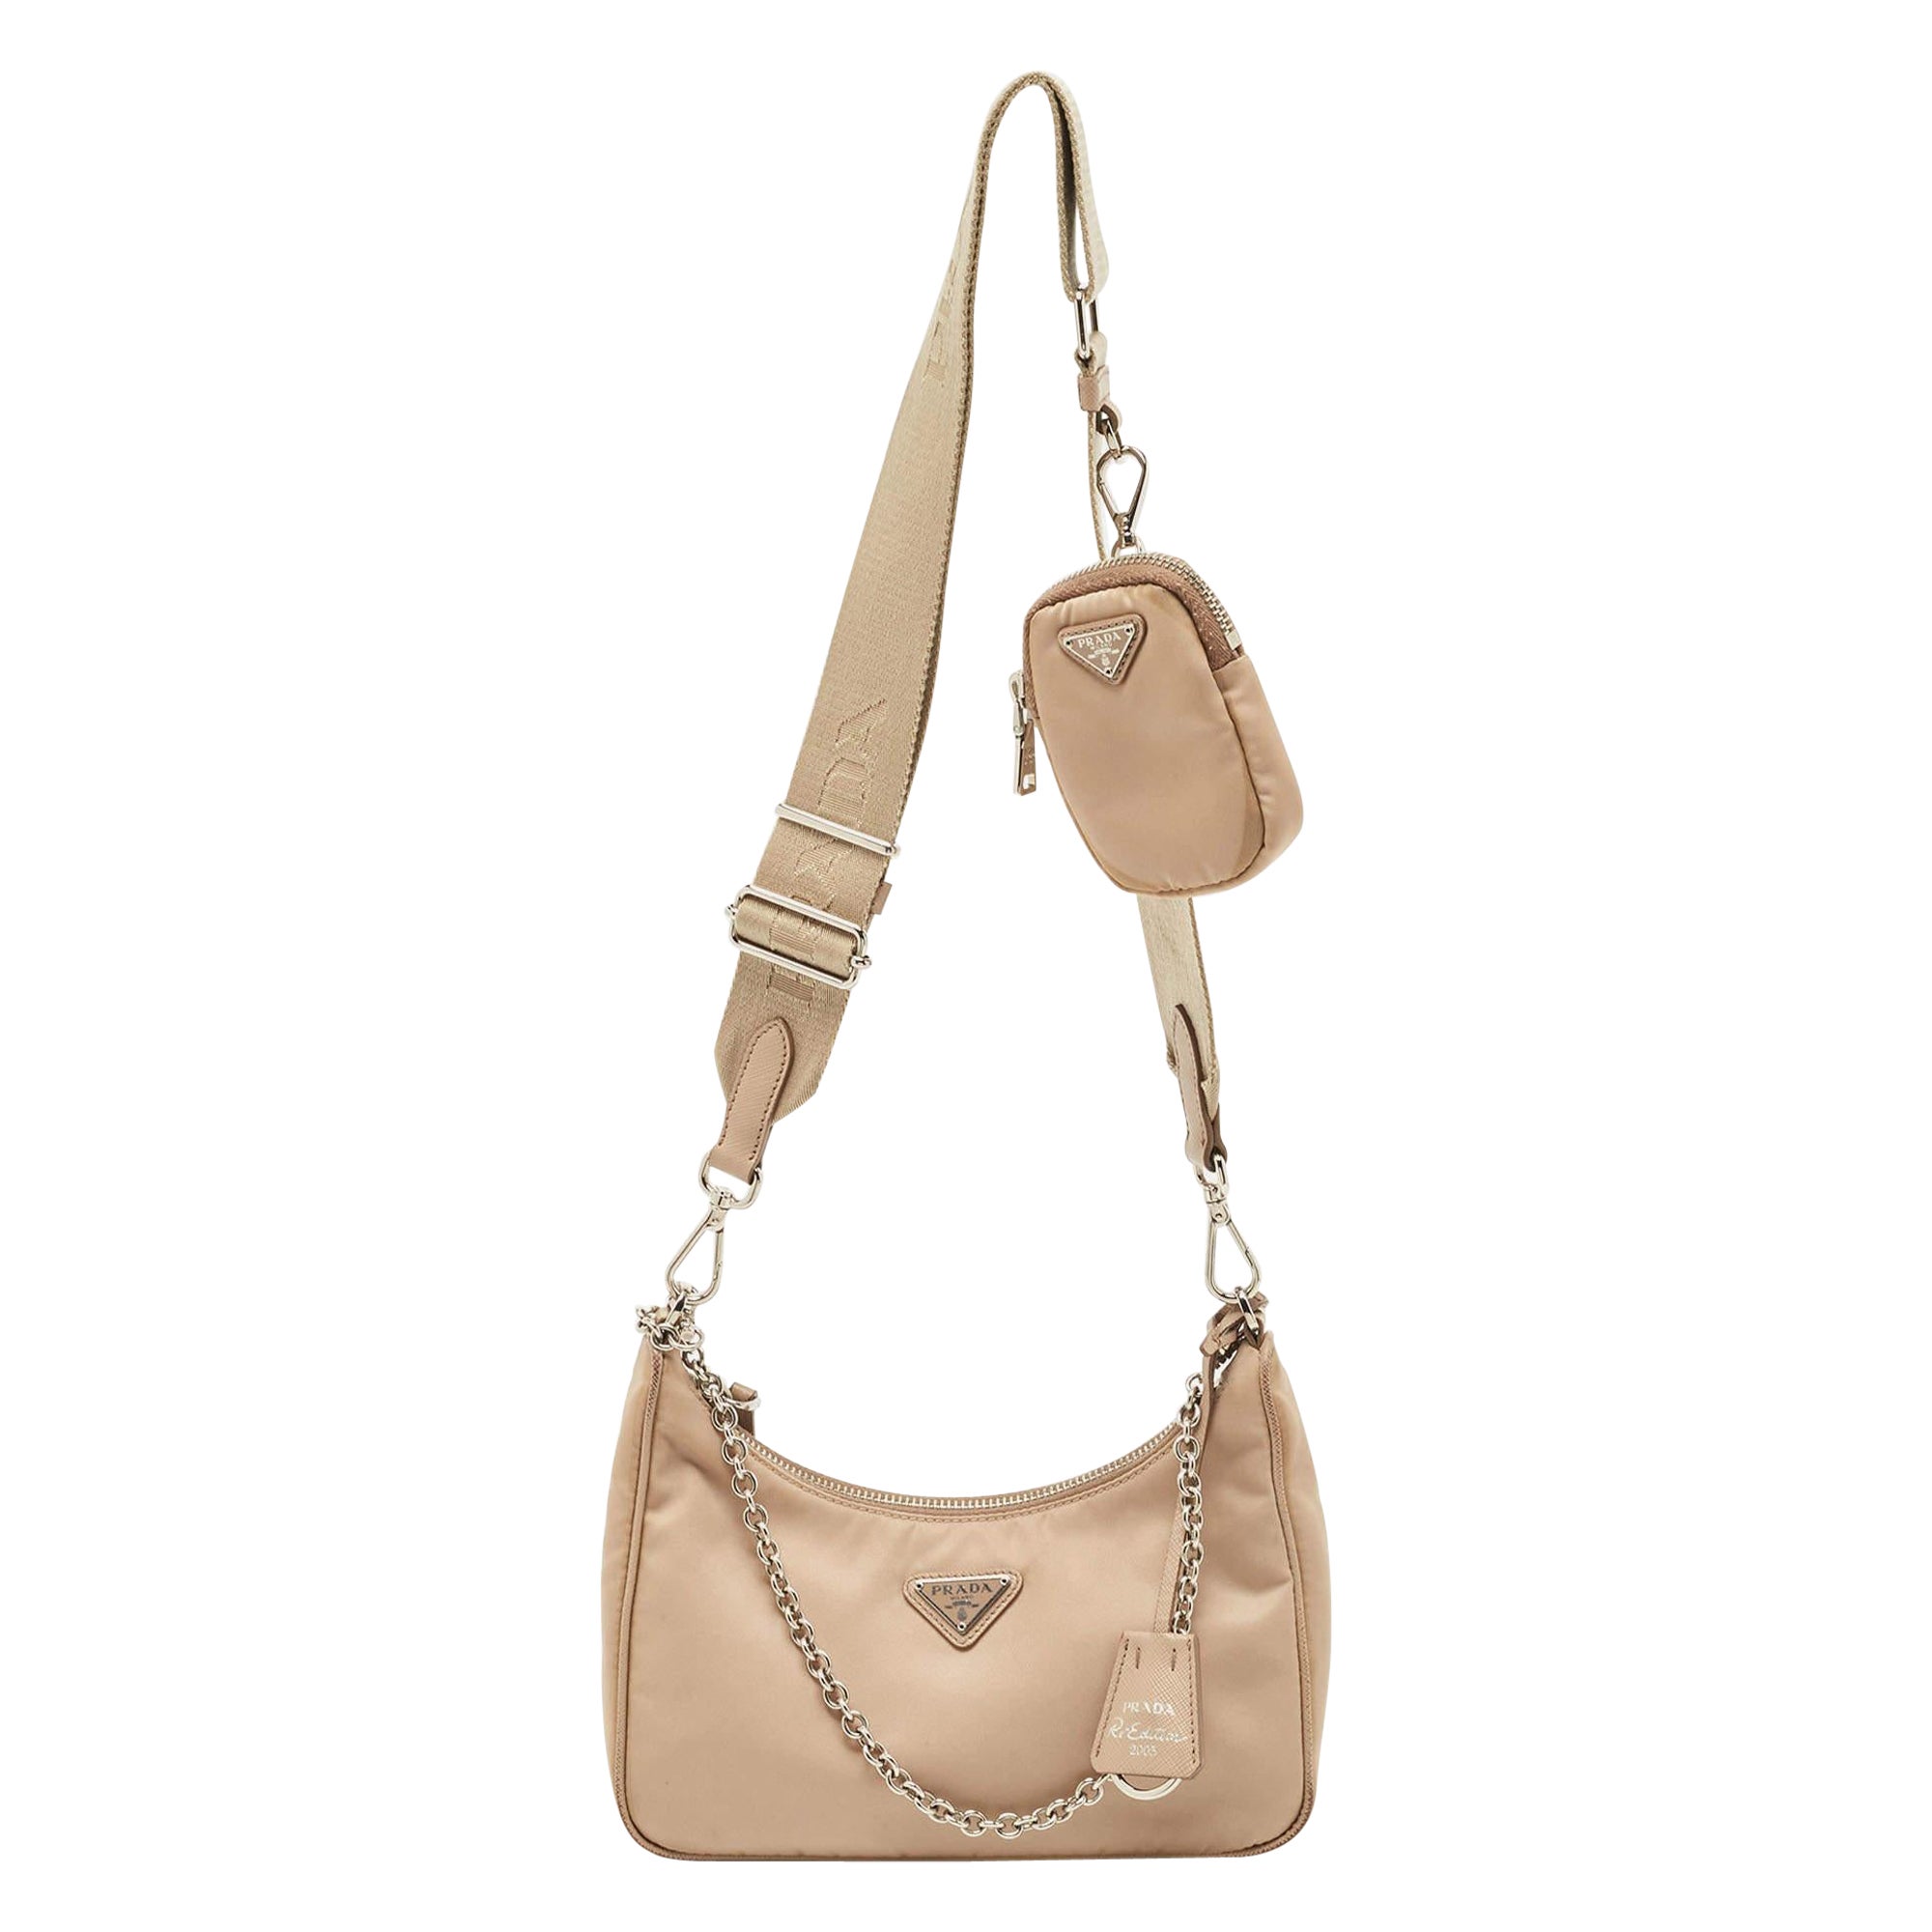 Beige Prada nylon re edition 2005! Great bag for on the go